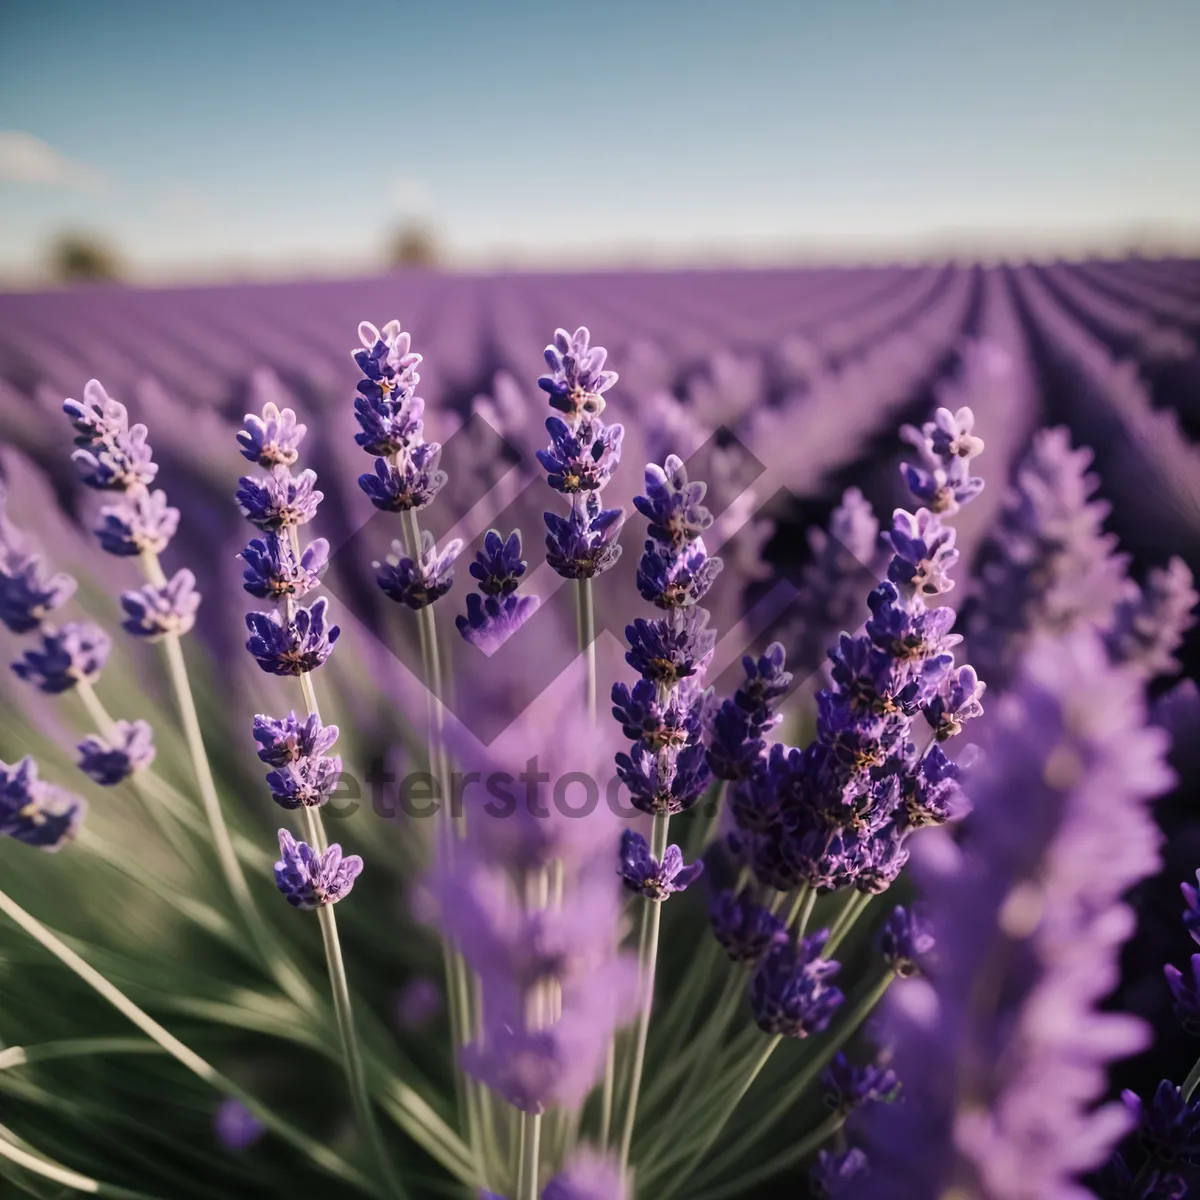 Picture of Lavender Fields in Bloom: A Fragrant Purple Landscape